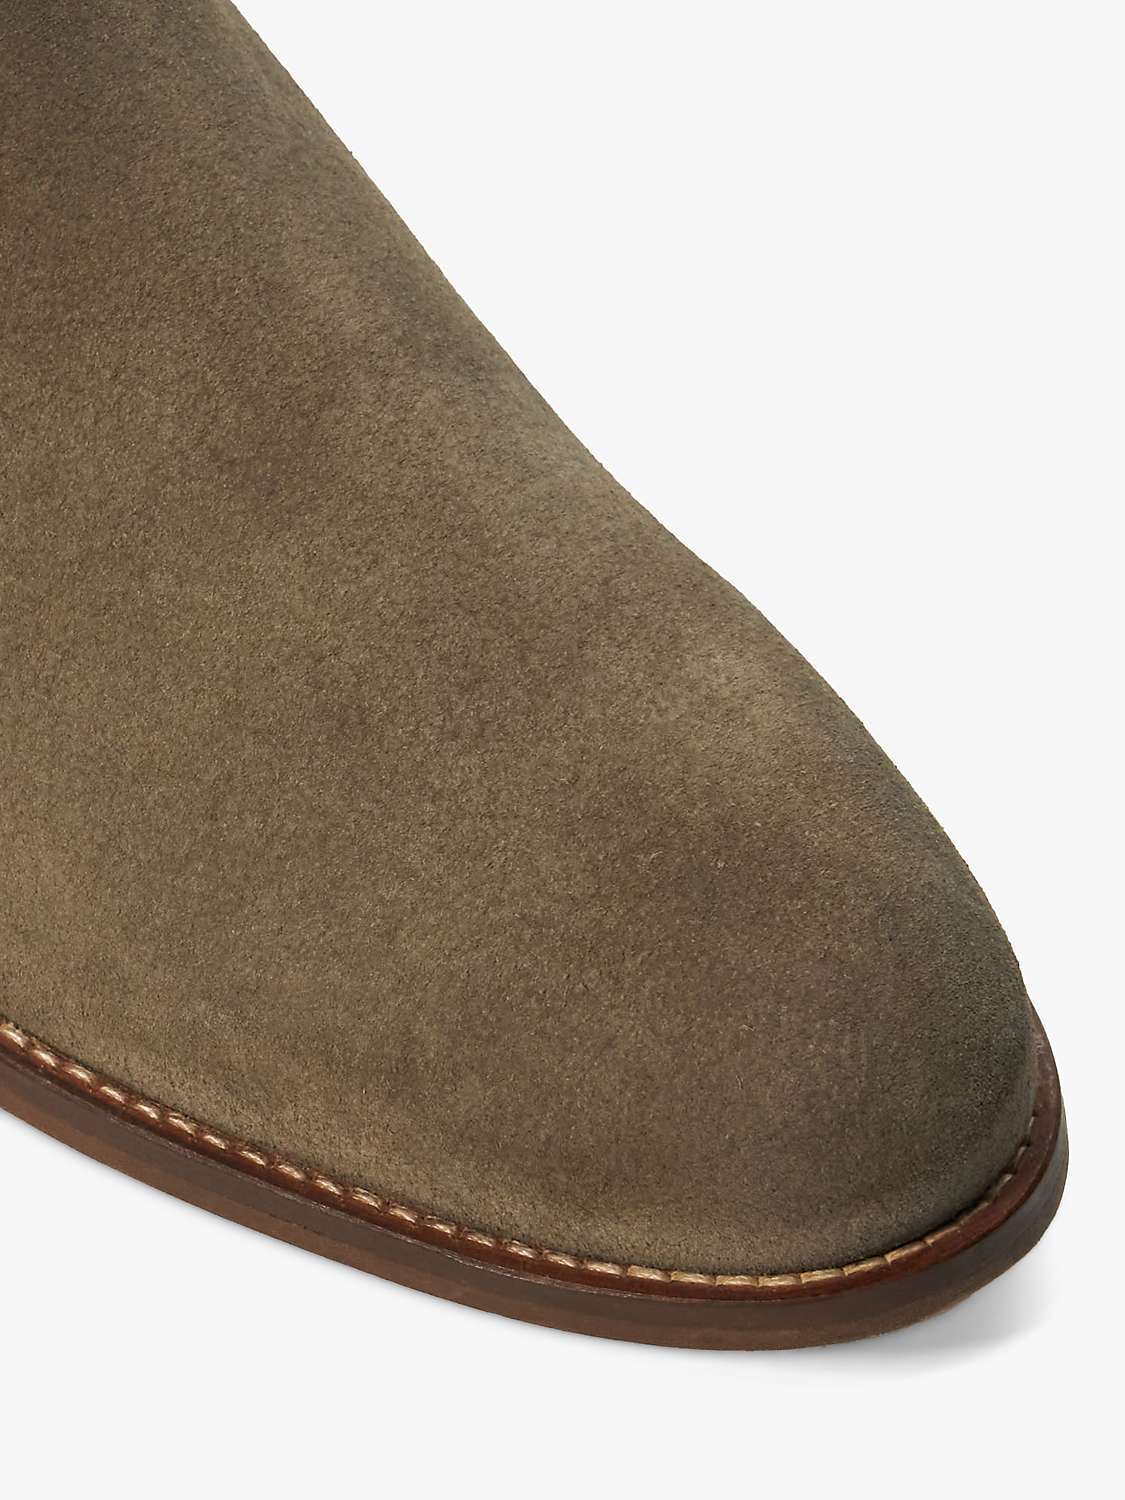 Buy Dune Collective Suede Chelsea Boots Online at johnlewis.com